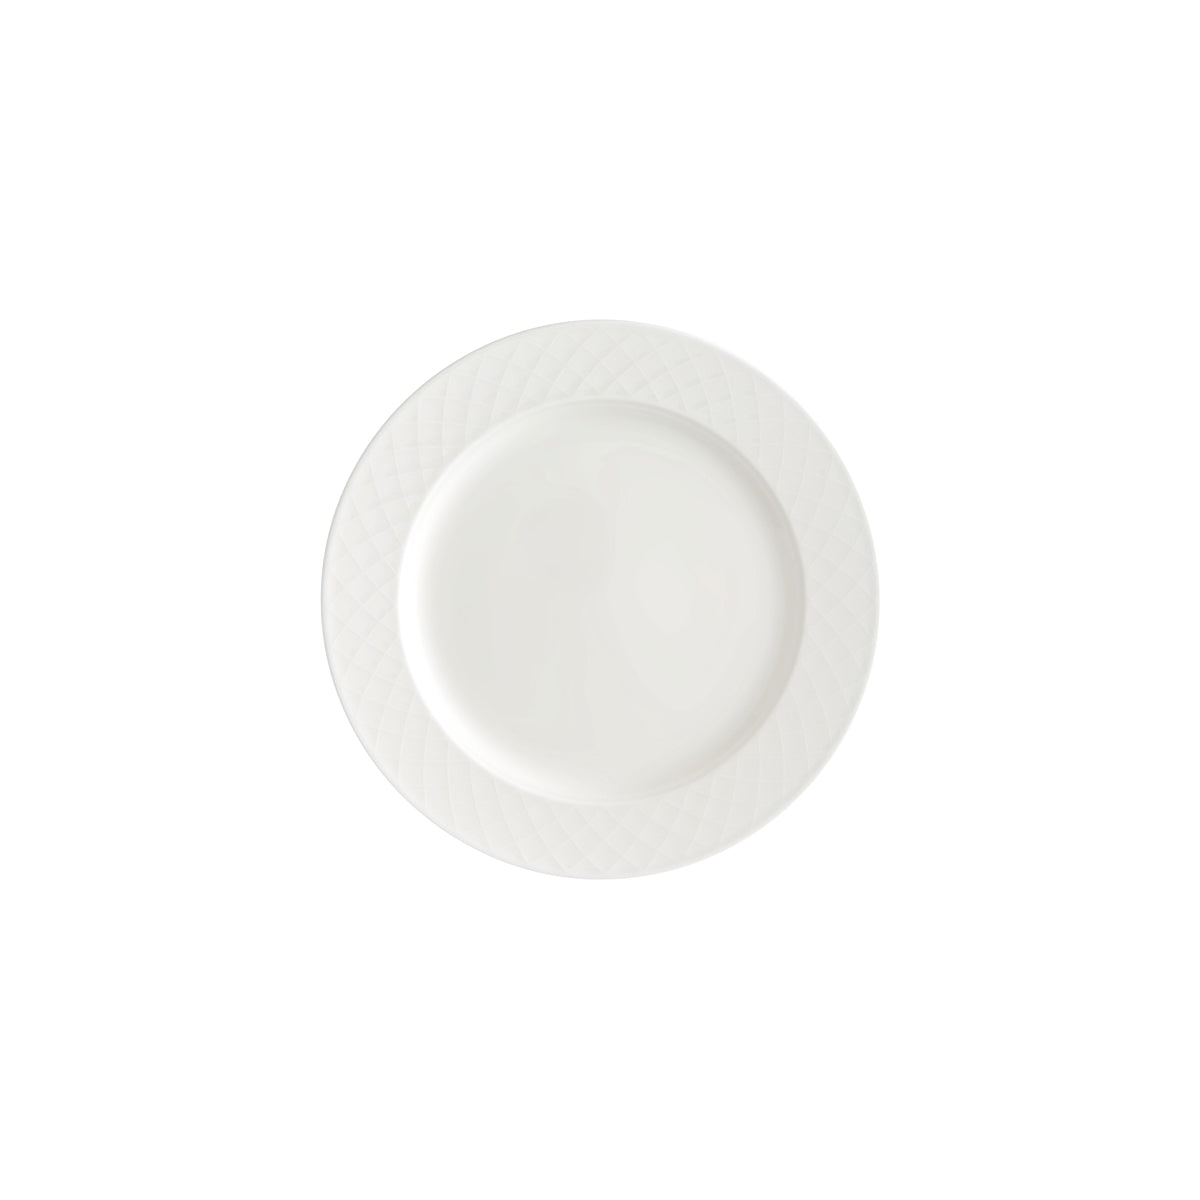 VB16-2238-2620 Villeroy And Boch Villeroy And Boch Bella White Plate Wide Rim 270mm Tomkin Australia Hospitality Supplies